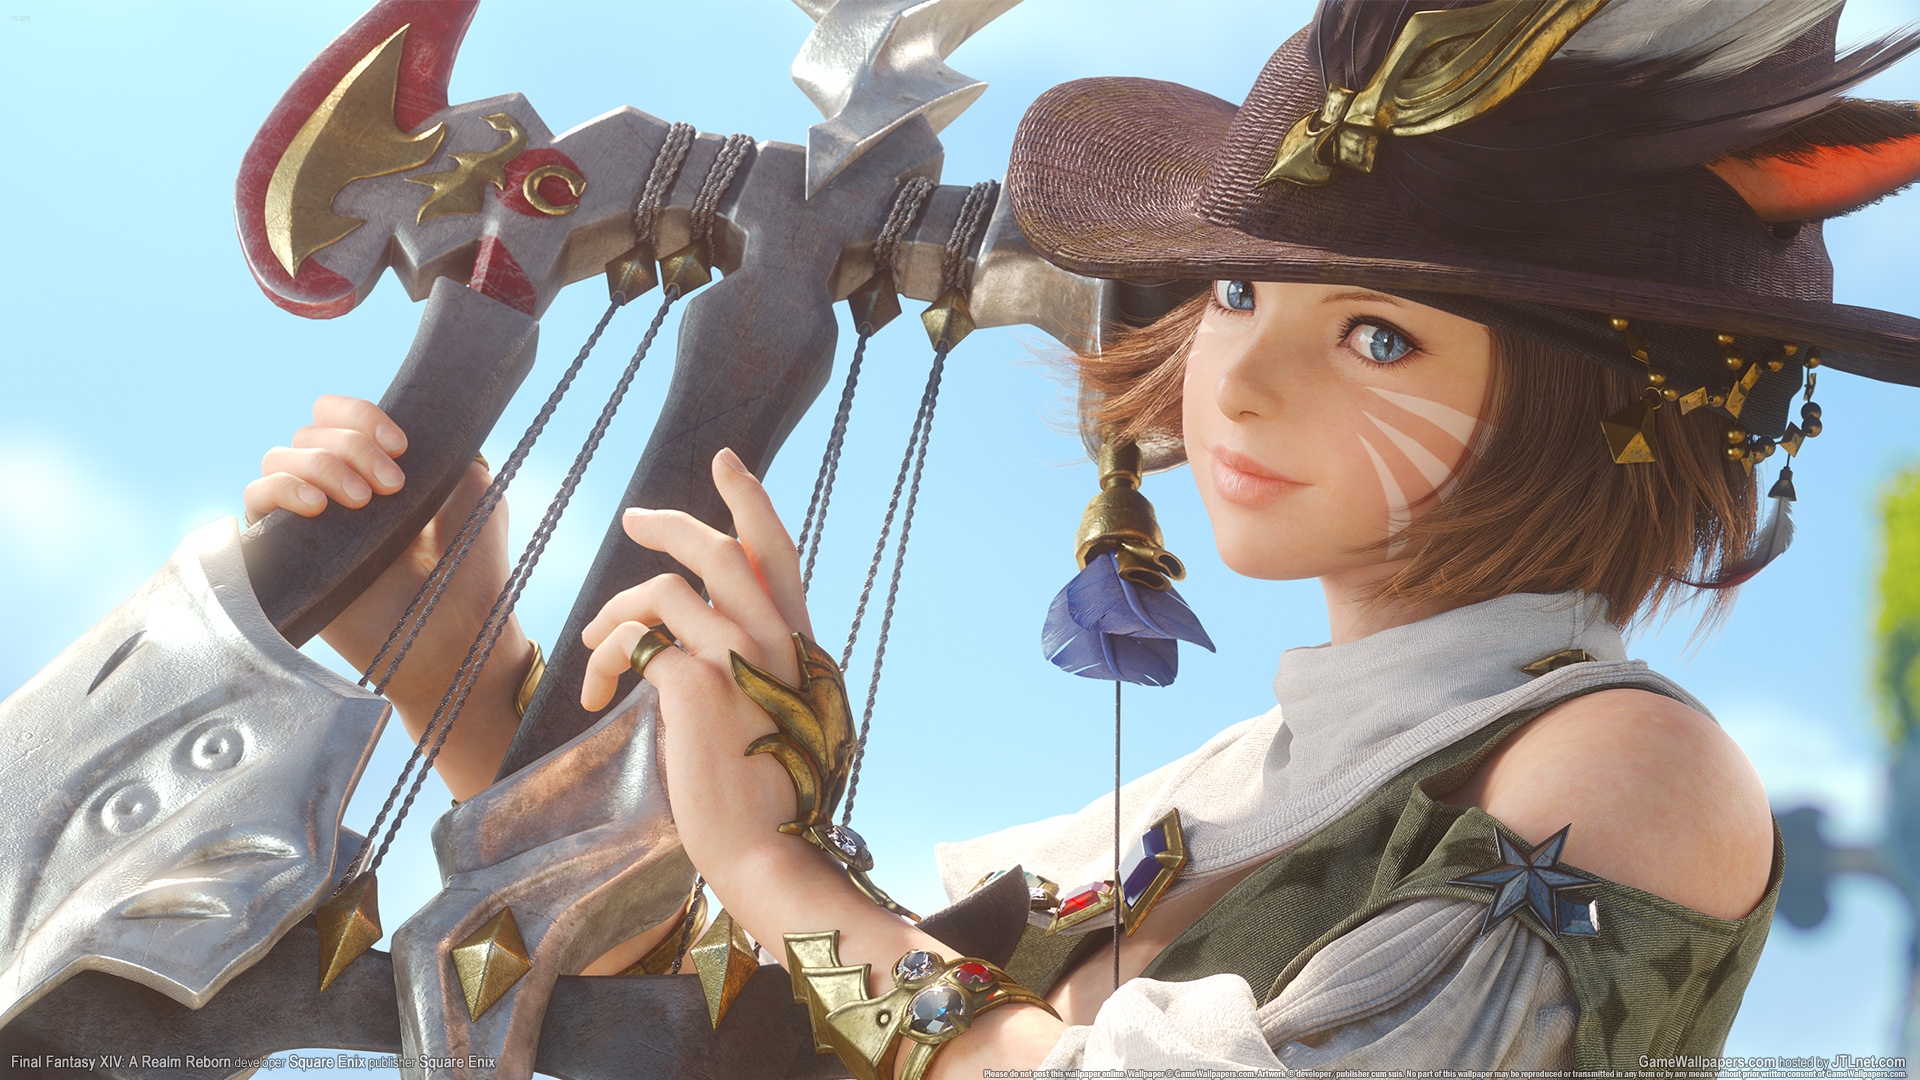 Final Fantasy Xiv A Realm Reborn Patch 2 5 5 Now Available